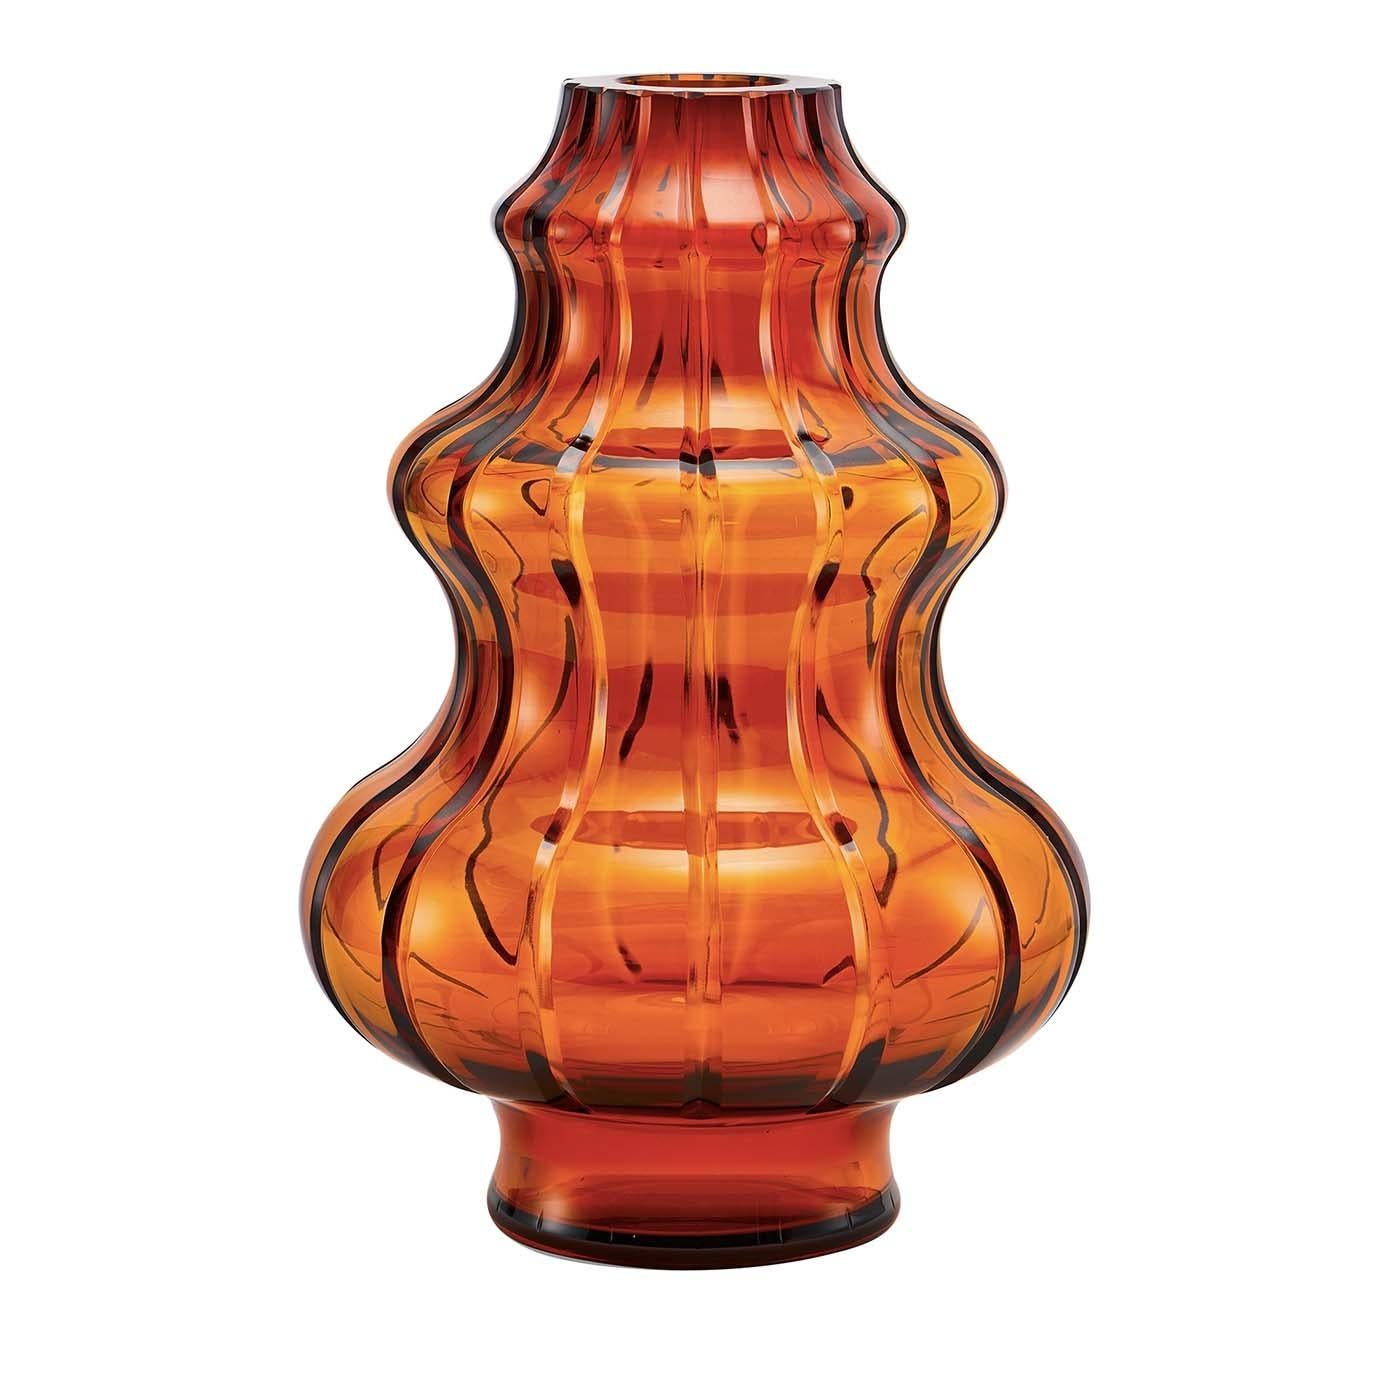 Part of the Boboda collection, this stunning vase is a superb decorative addition to any home and can be displayed alone or combined with the others in the same series. Its sinuous volumes in crystal with a delicate cognac color are marked with a